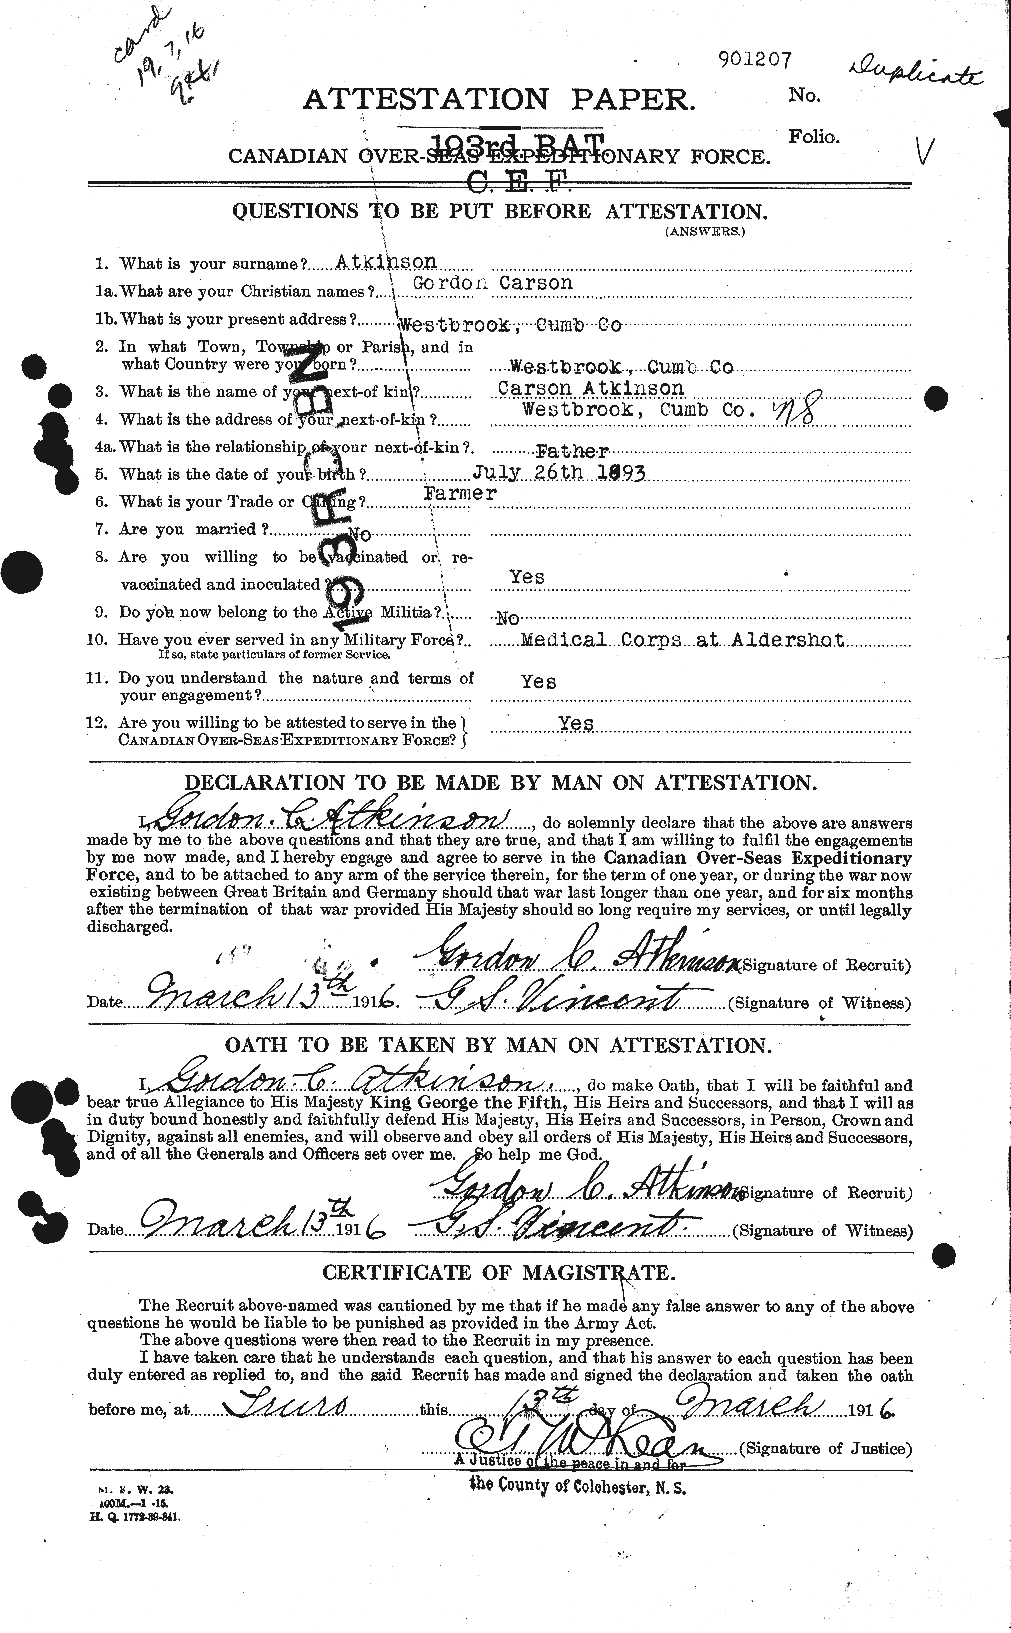 Personnel Records of the First World War - CEF 217398a